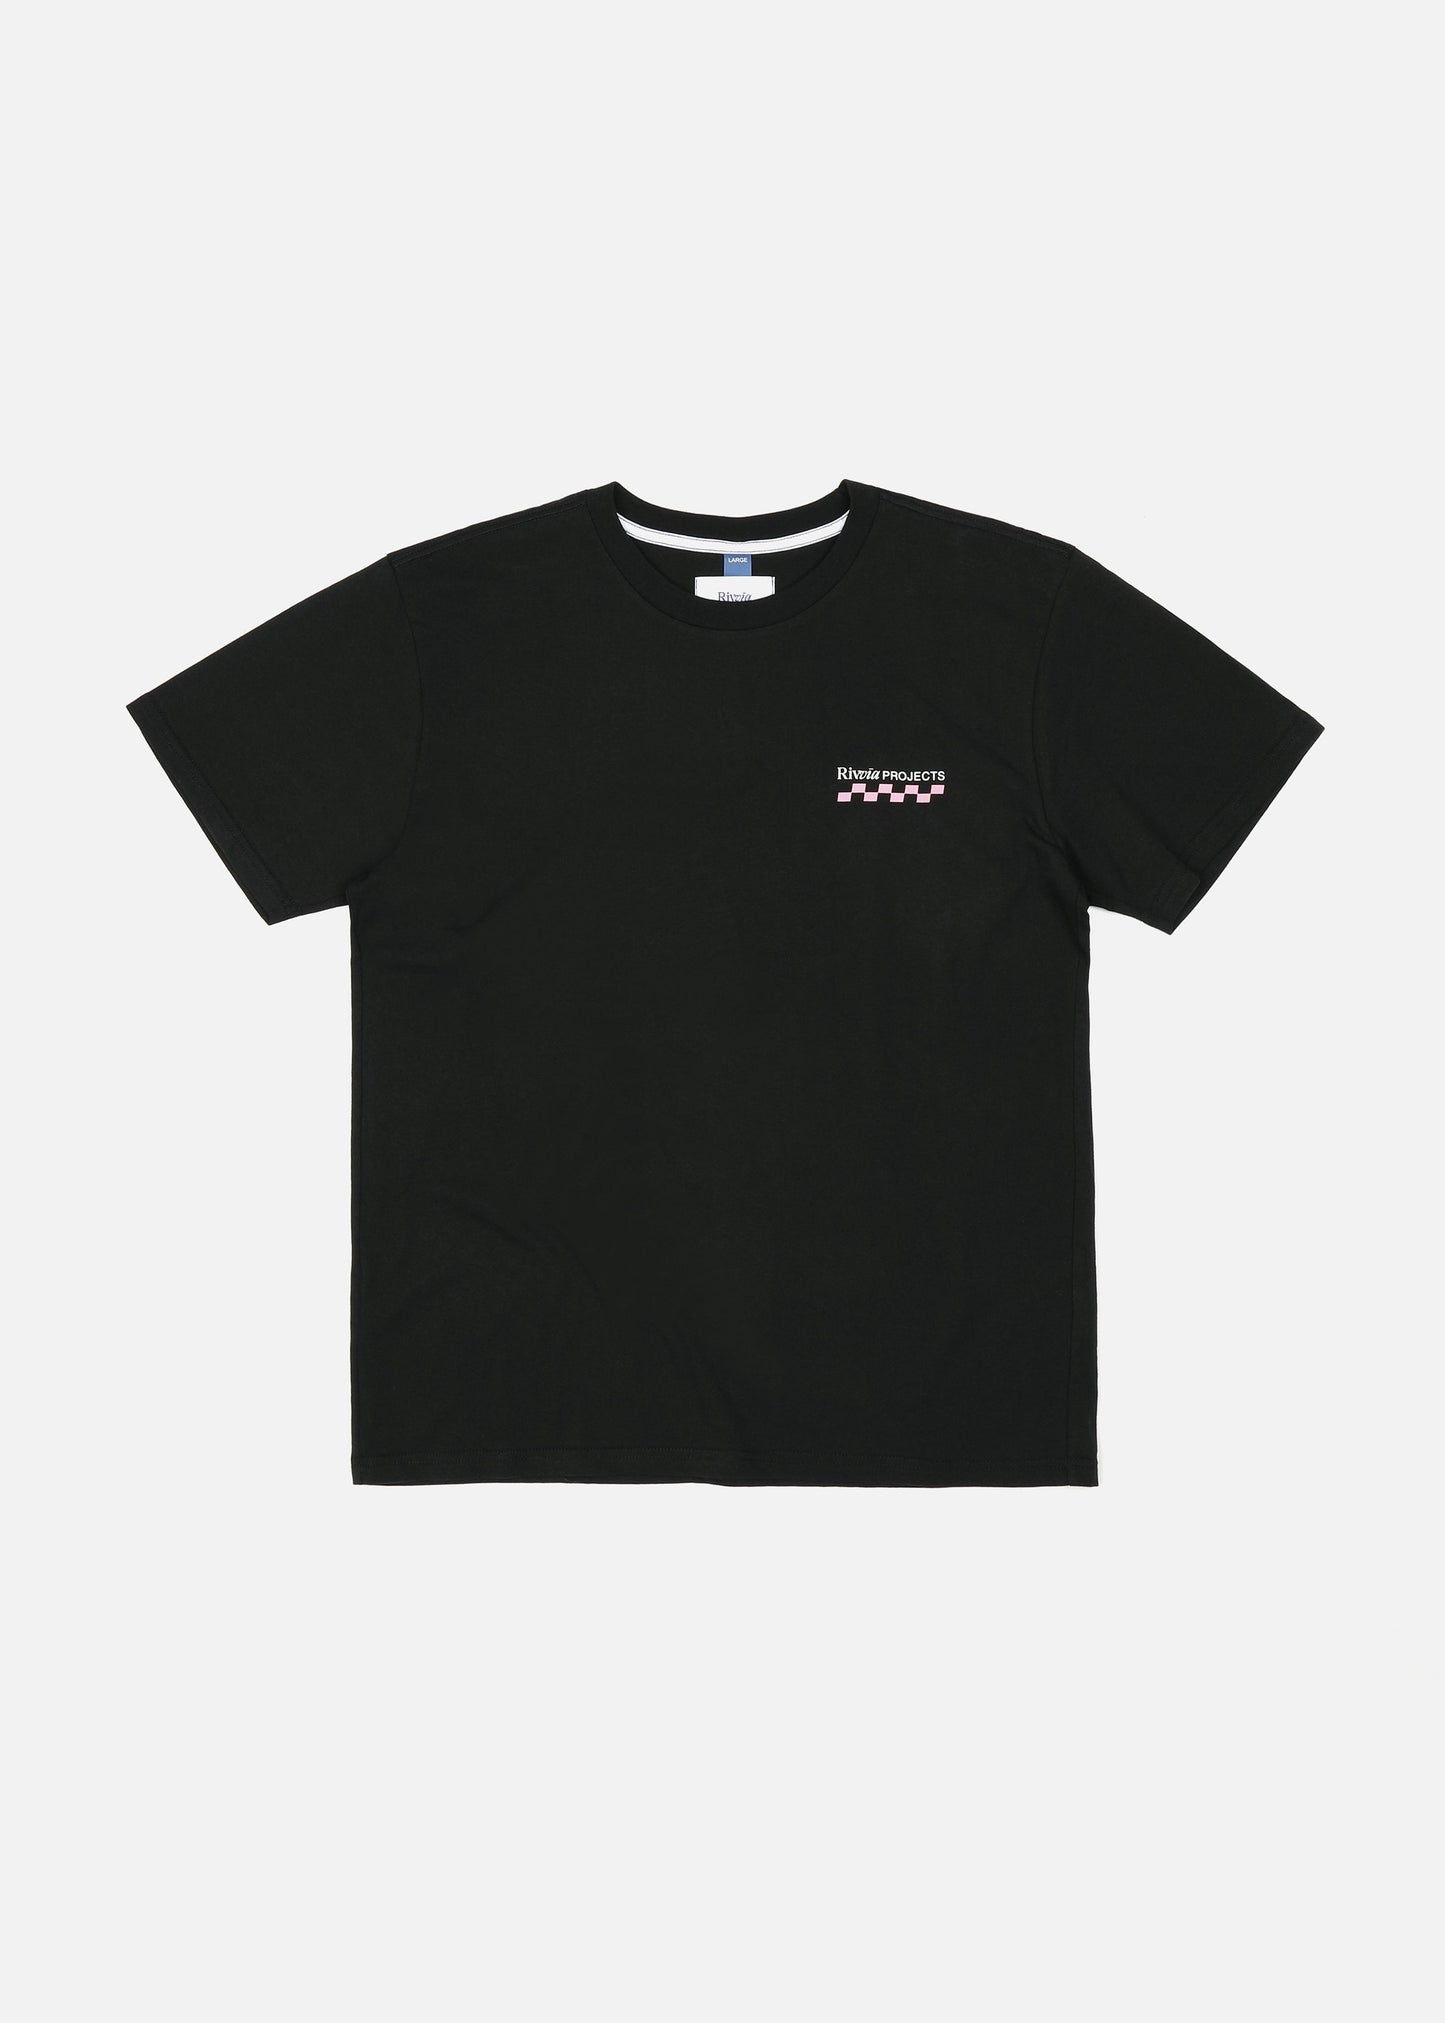 GRAND PROJECTS T-SHIRT : BLACK